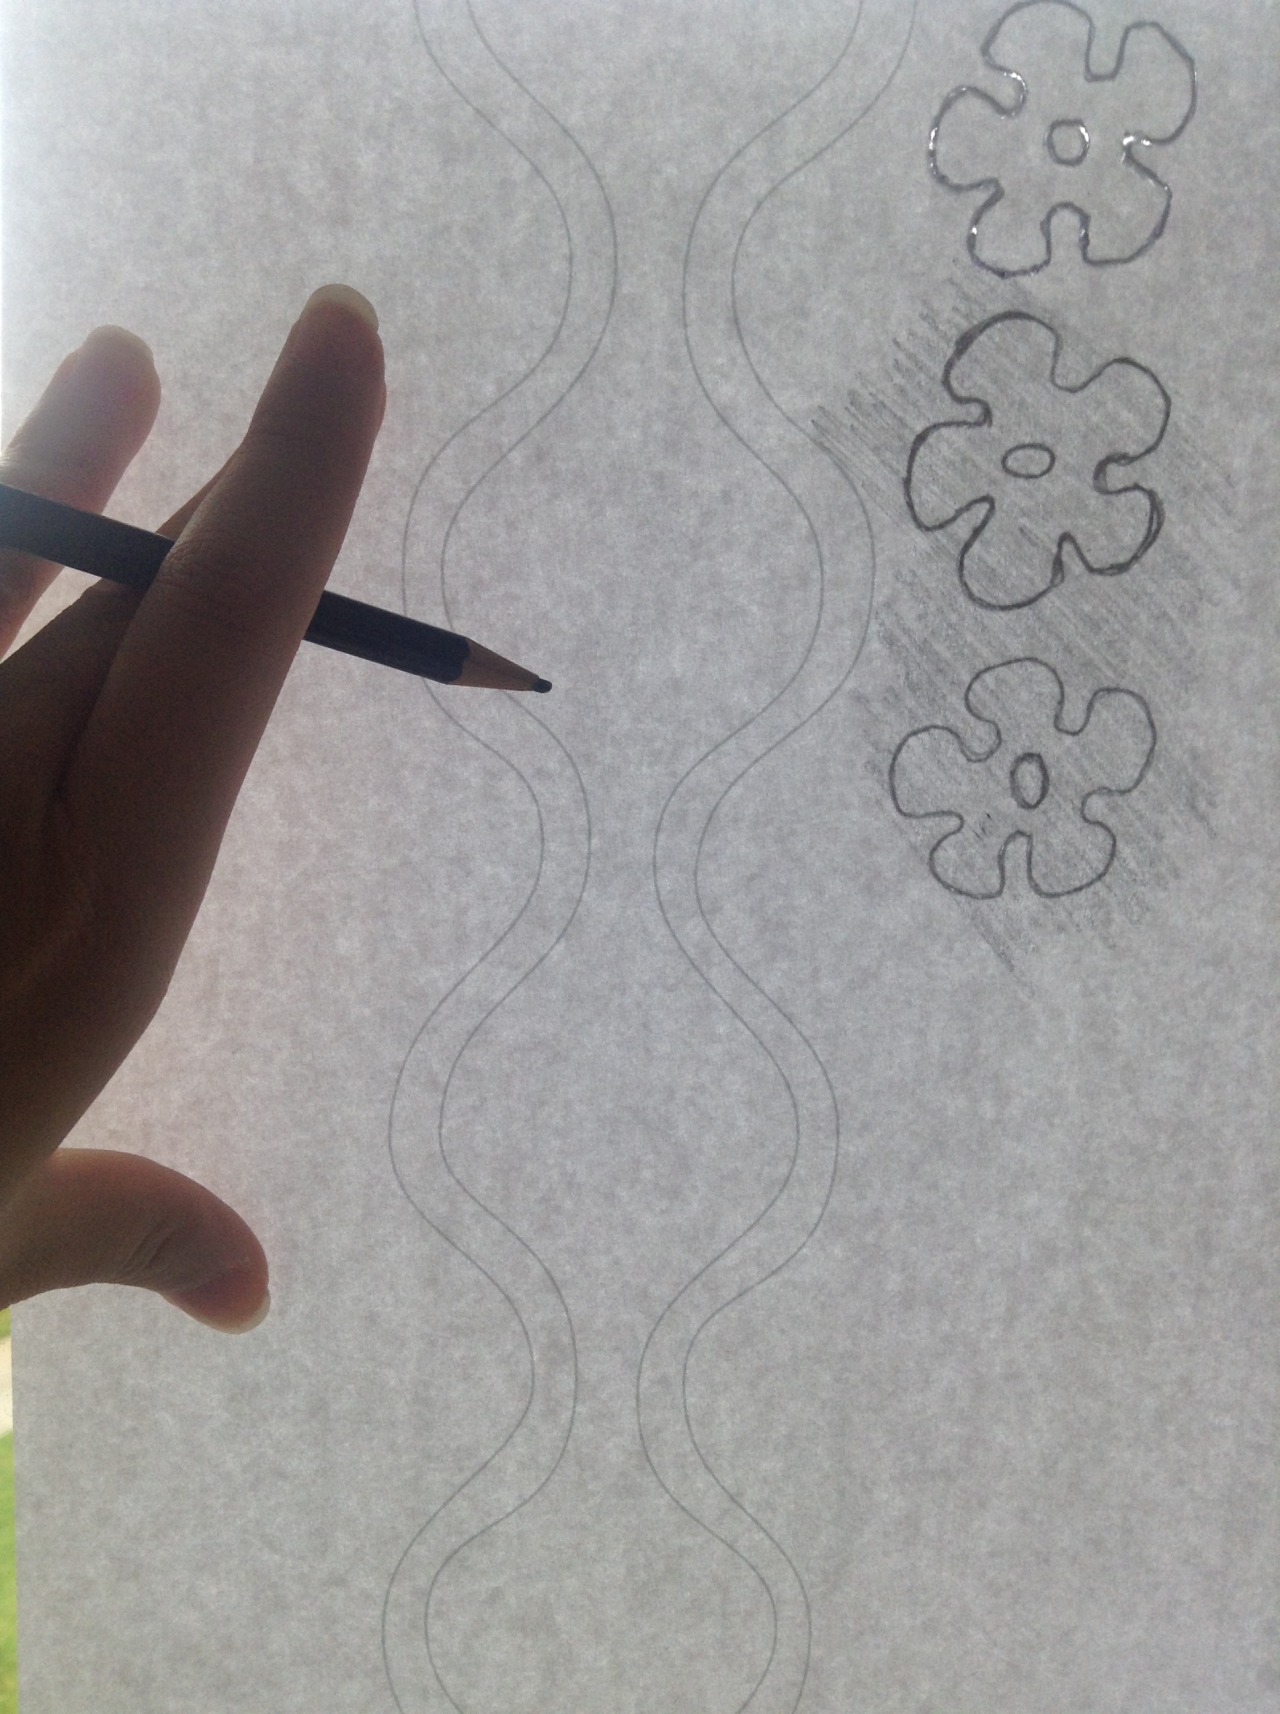 404]How To Trace Patterns Using Tracing Paper OR Wrapping Paper